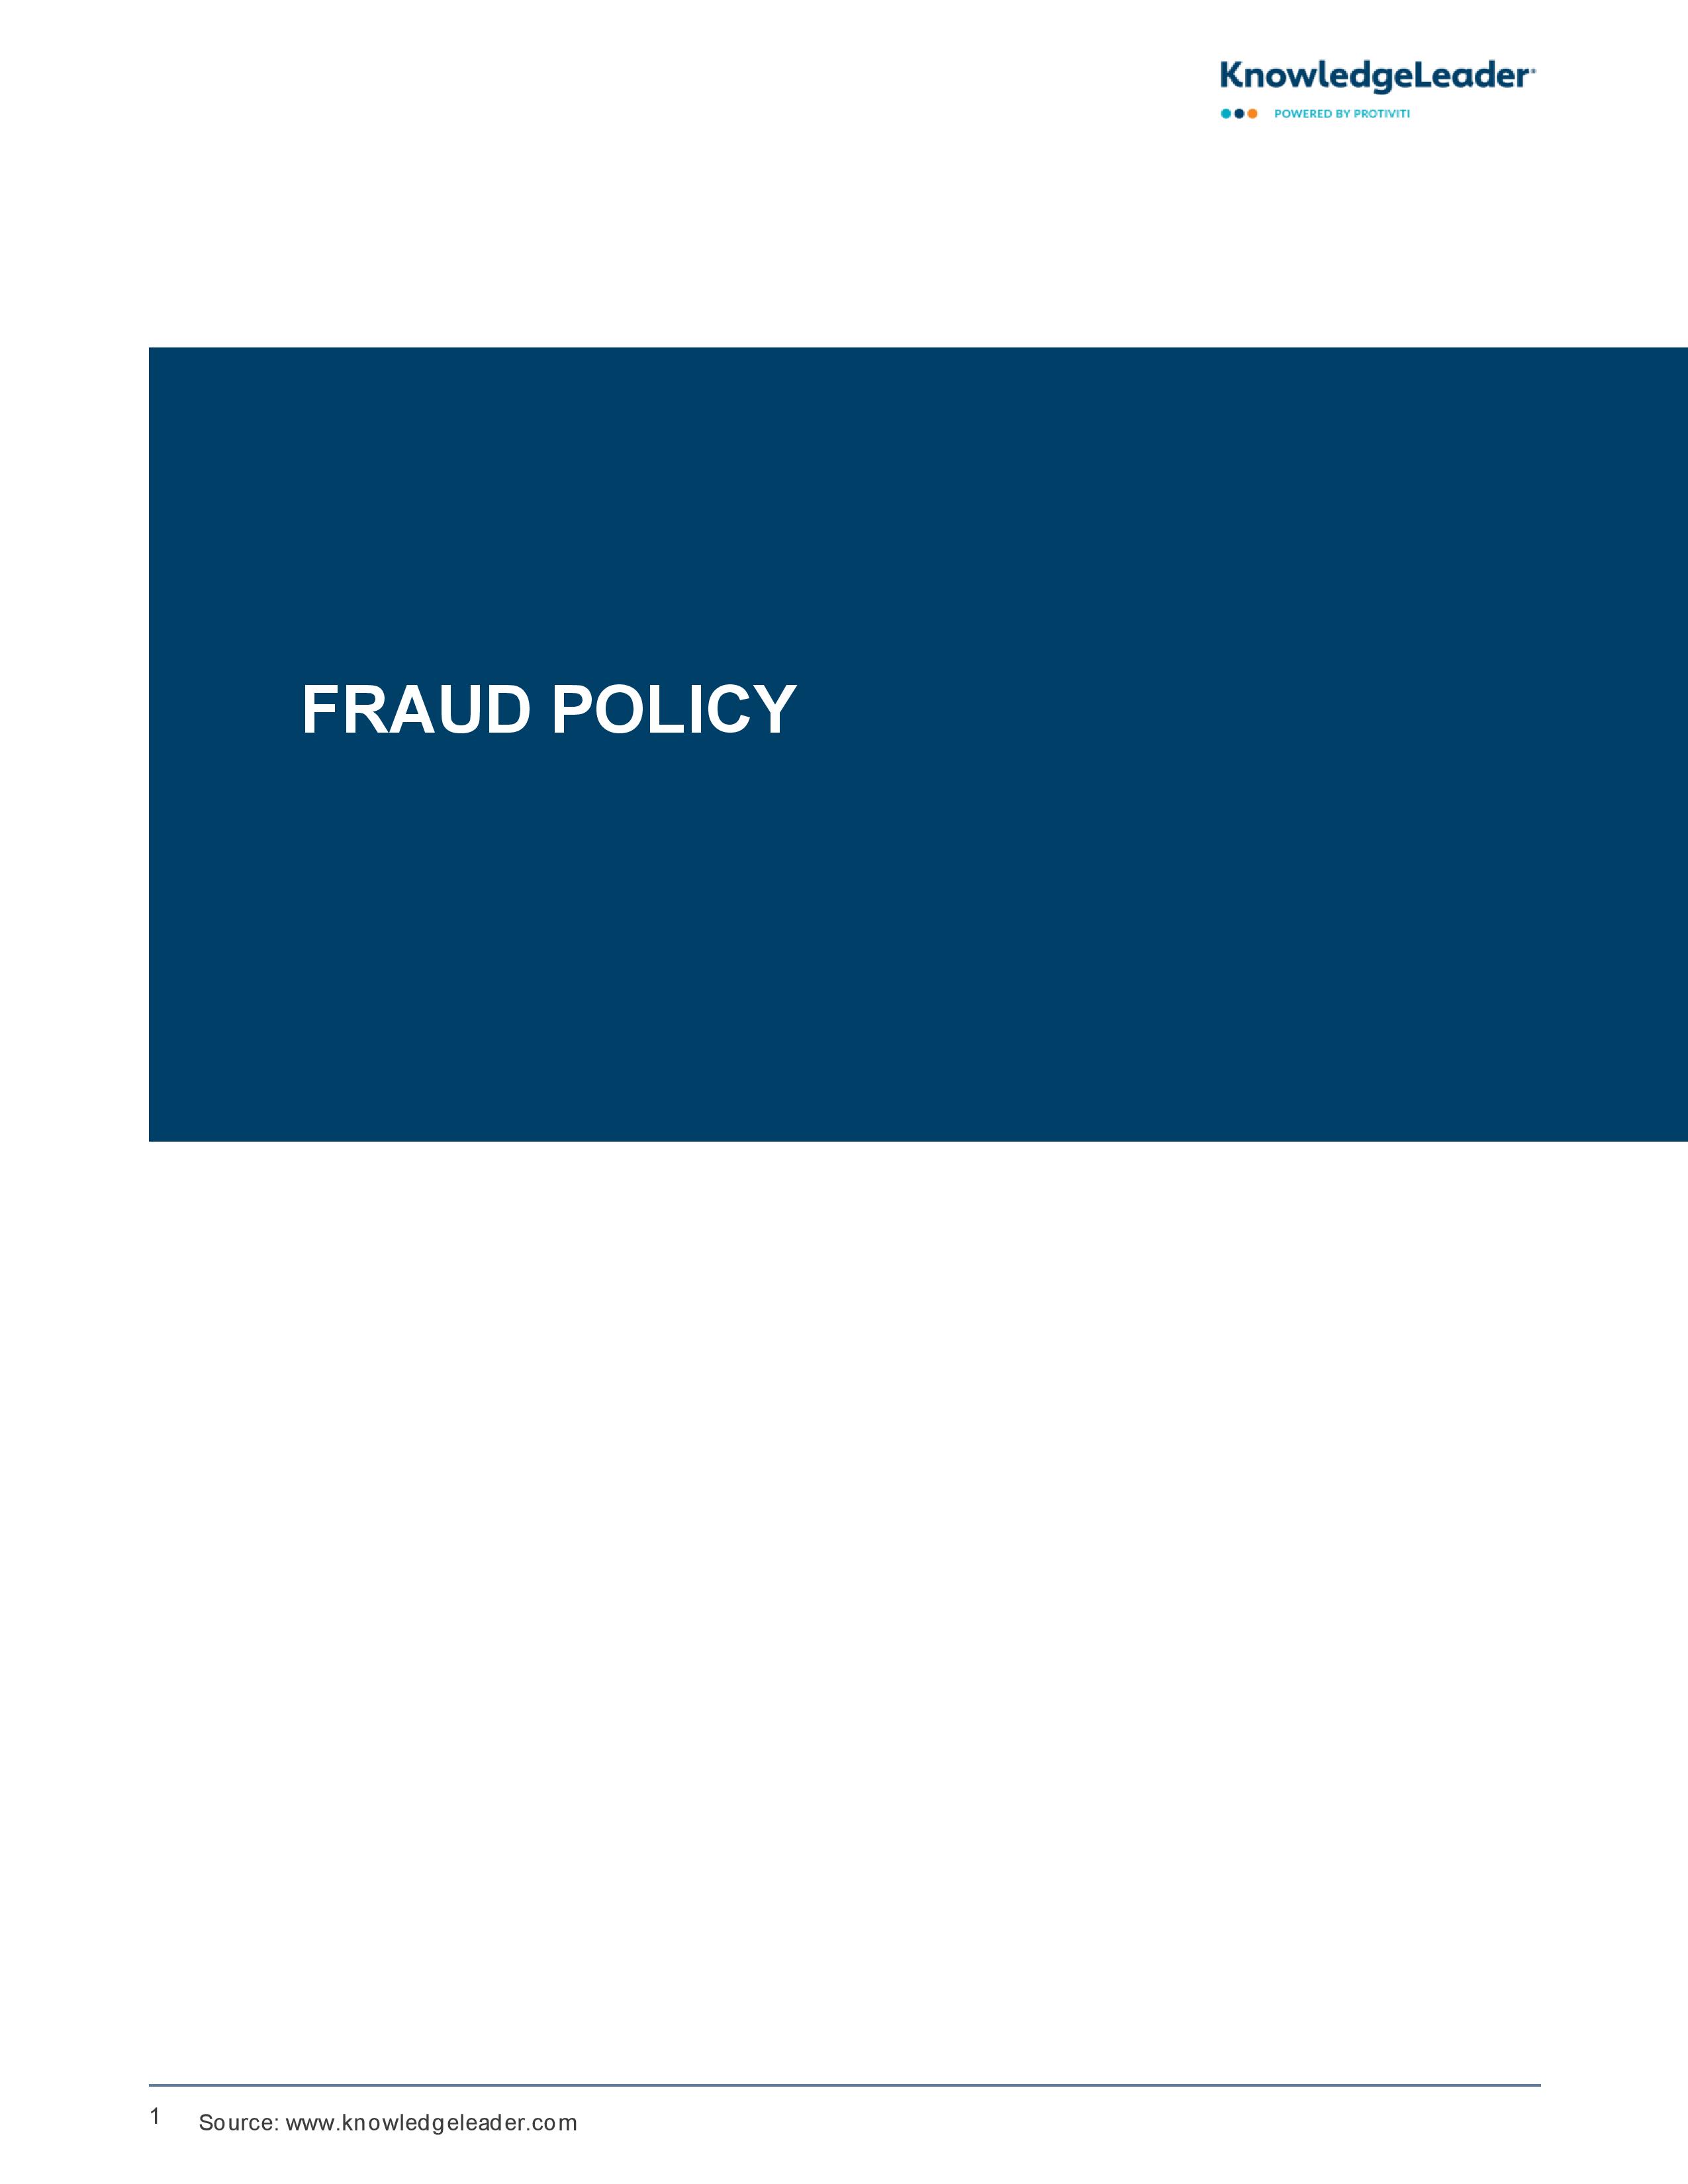 Screenshot of the first page of Fraud Policy